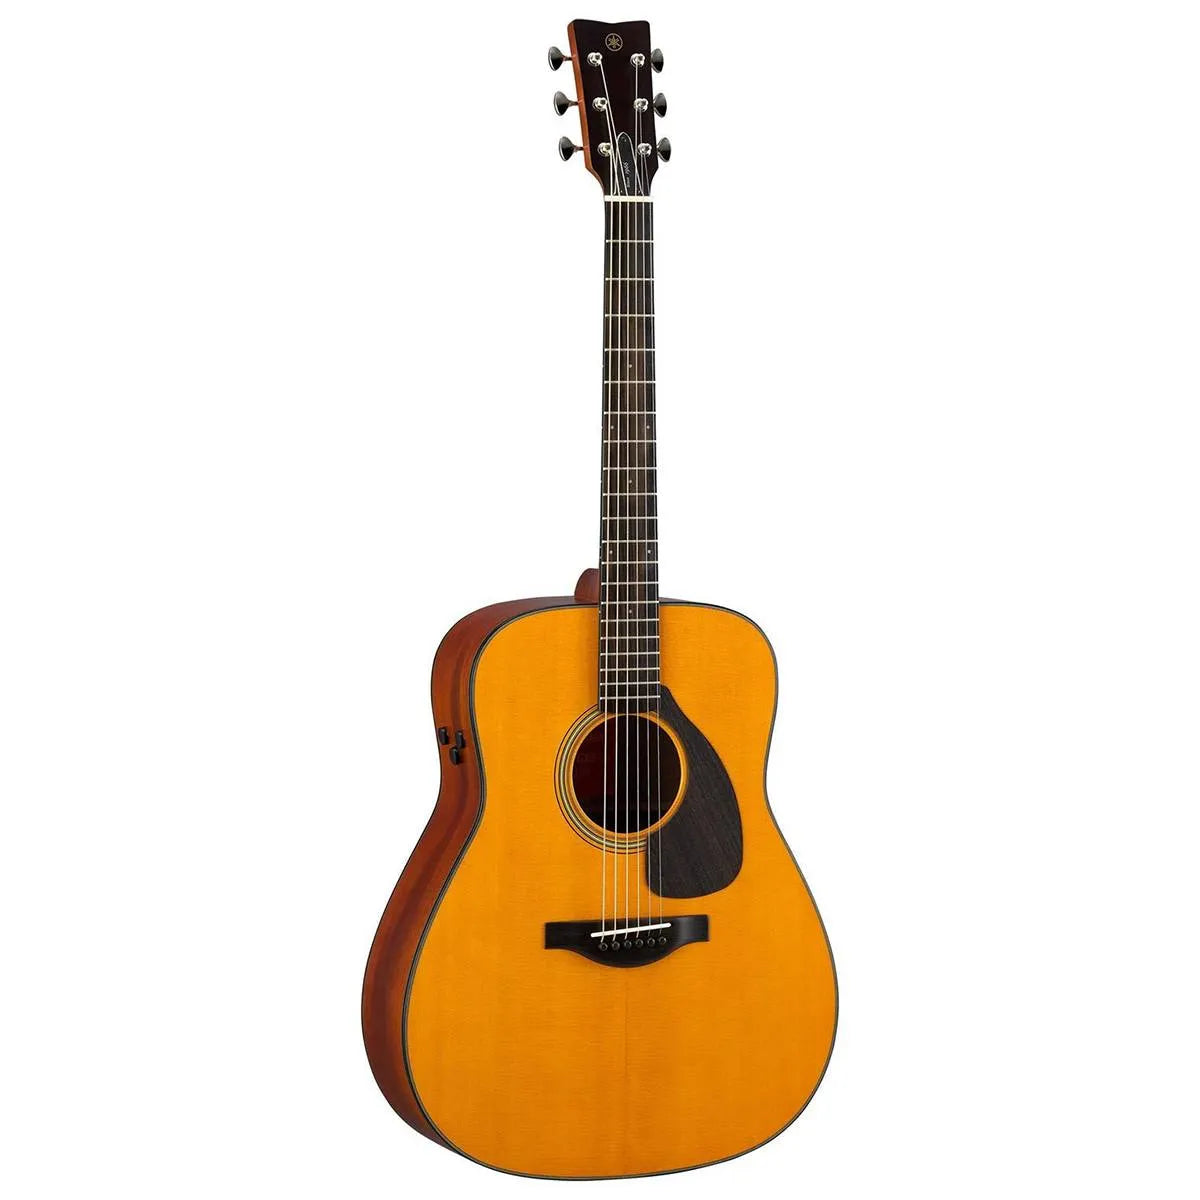 Yamaha FGX5 Electric Acoustic Guitar Made in Japan